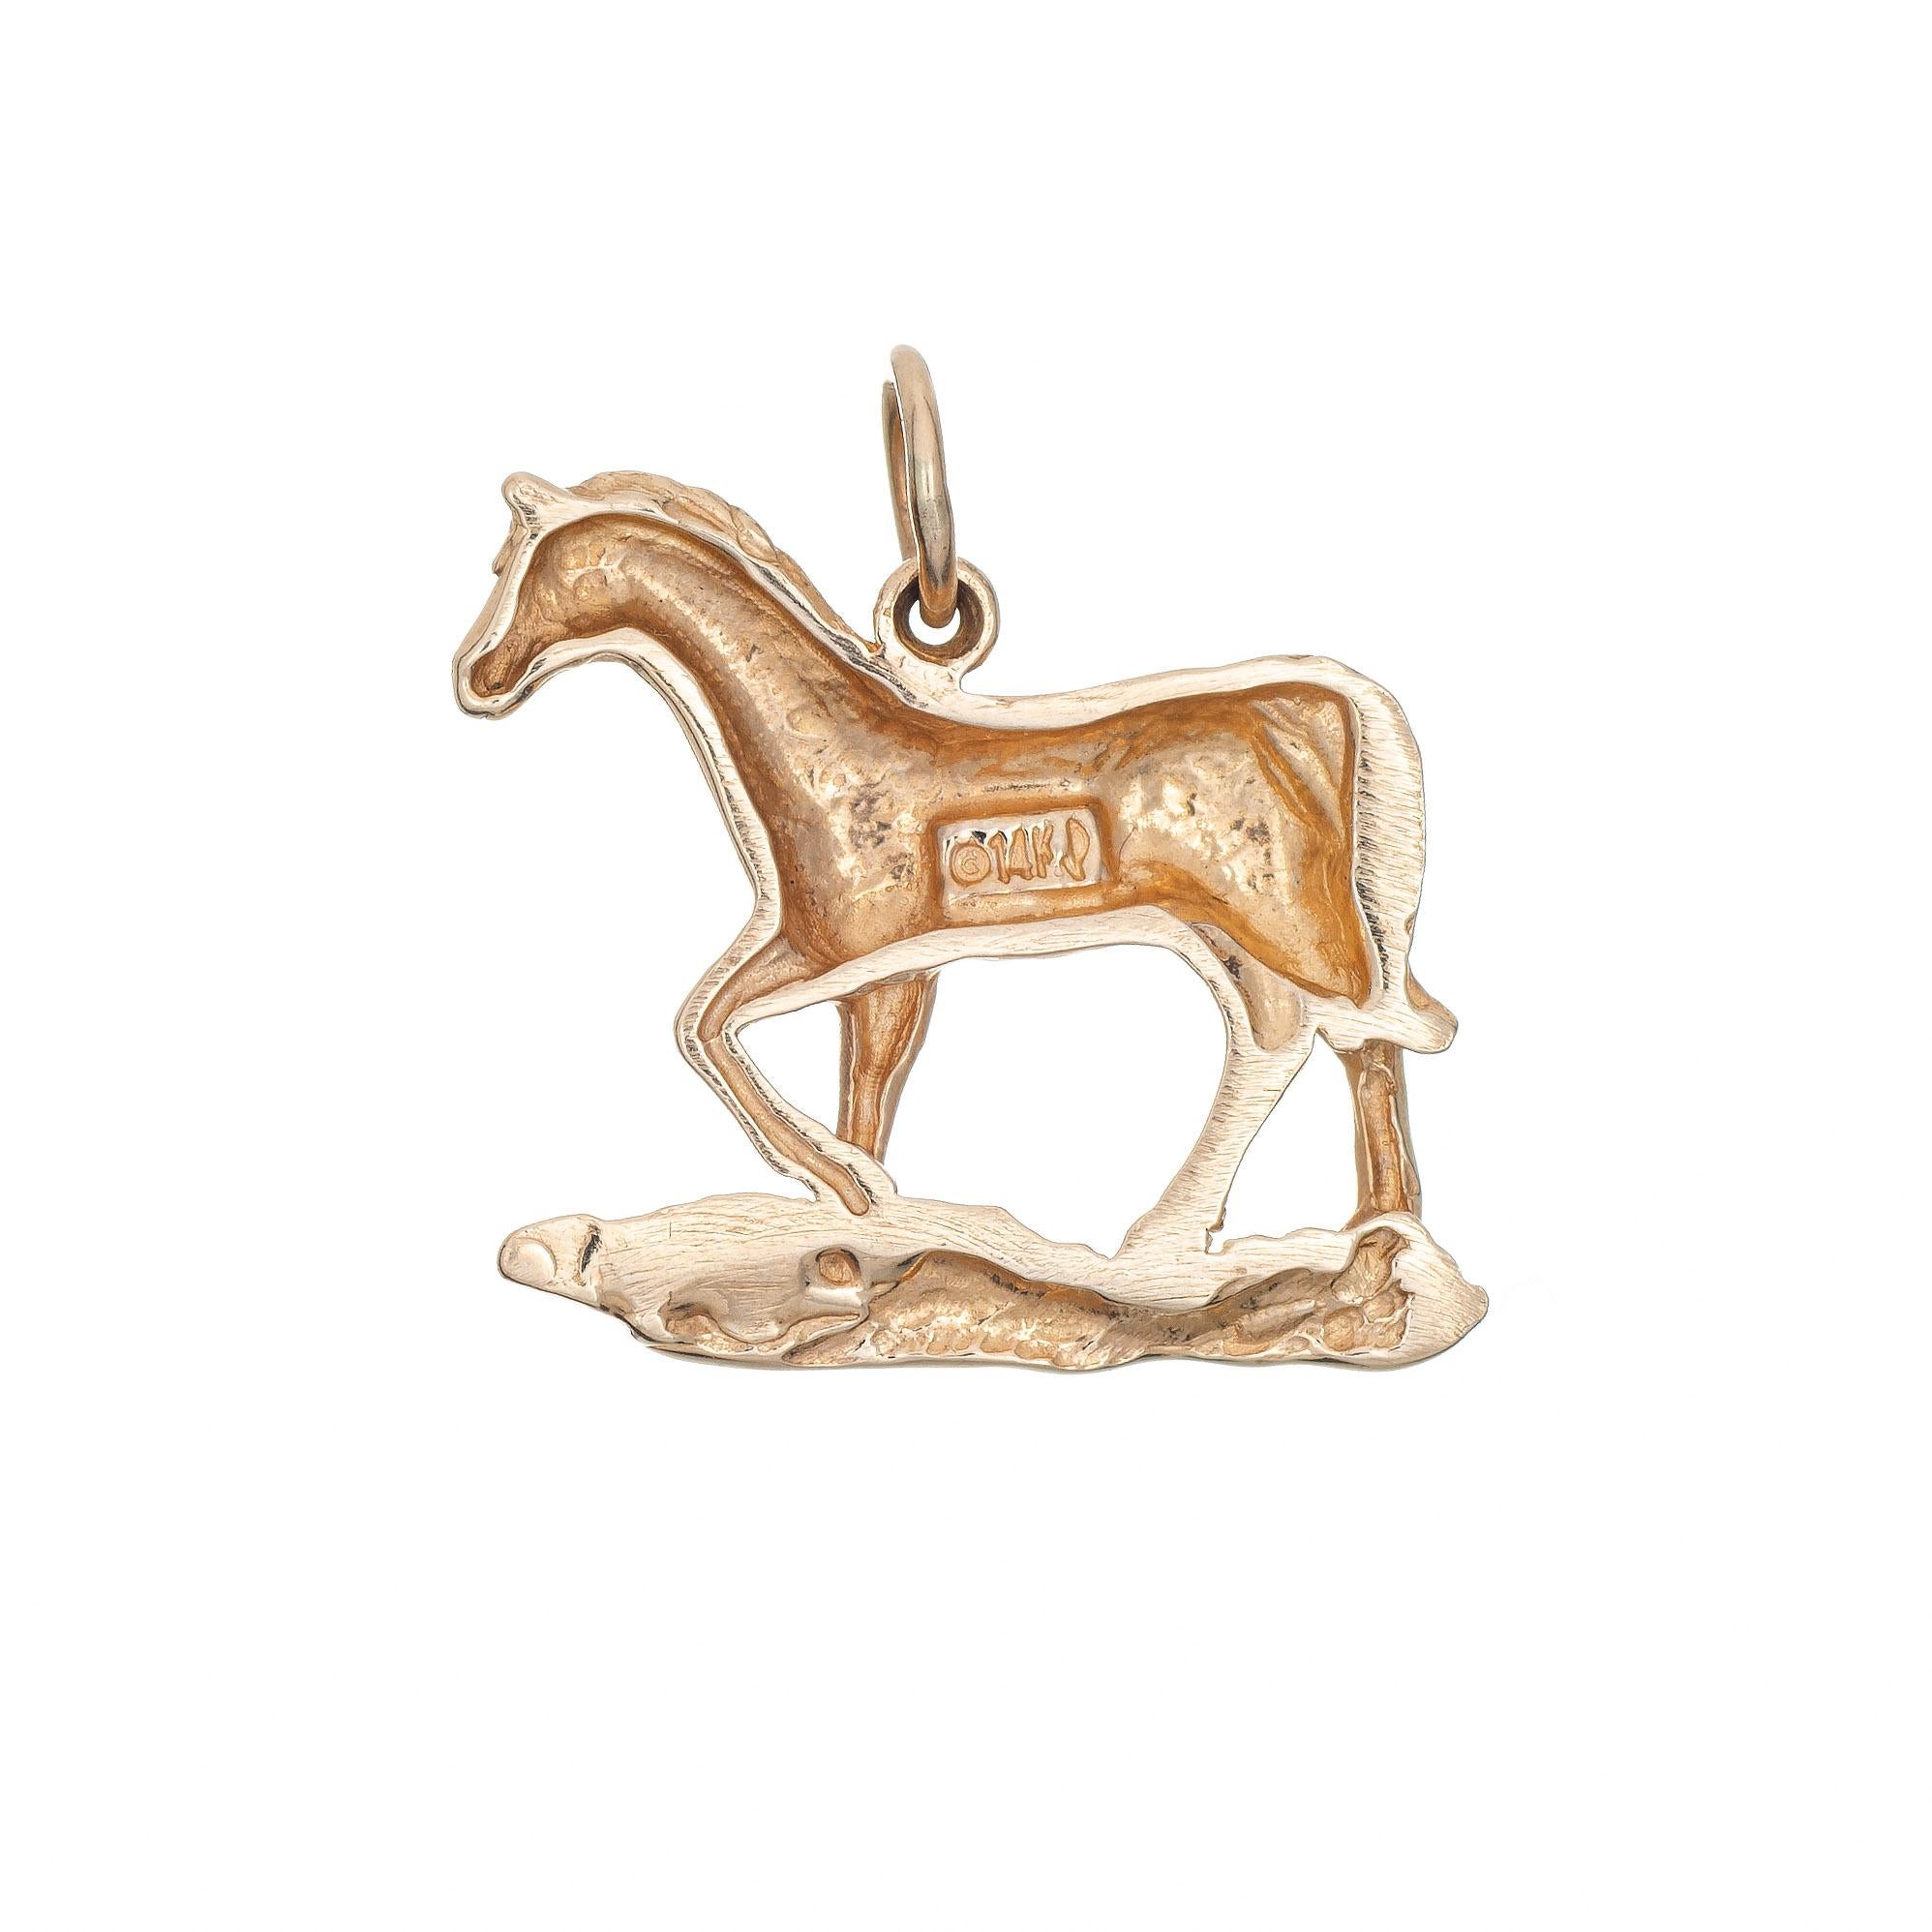 Finely detailed vintage horse charm crafted in 14k yellow gold.  

The trotting horse is smaller in scale (3/4 inch diameter) and great worn on a charm bracelet or as a pendant.

The charm is in very good condition and was recently professionally